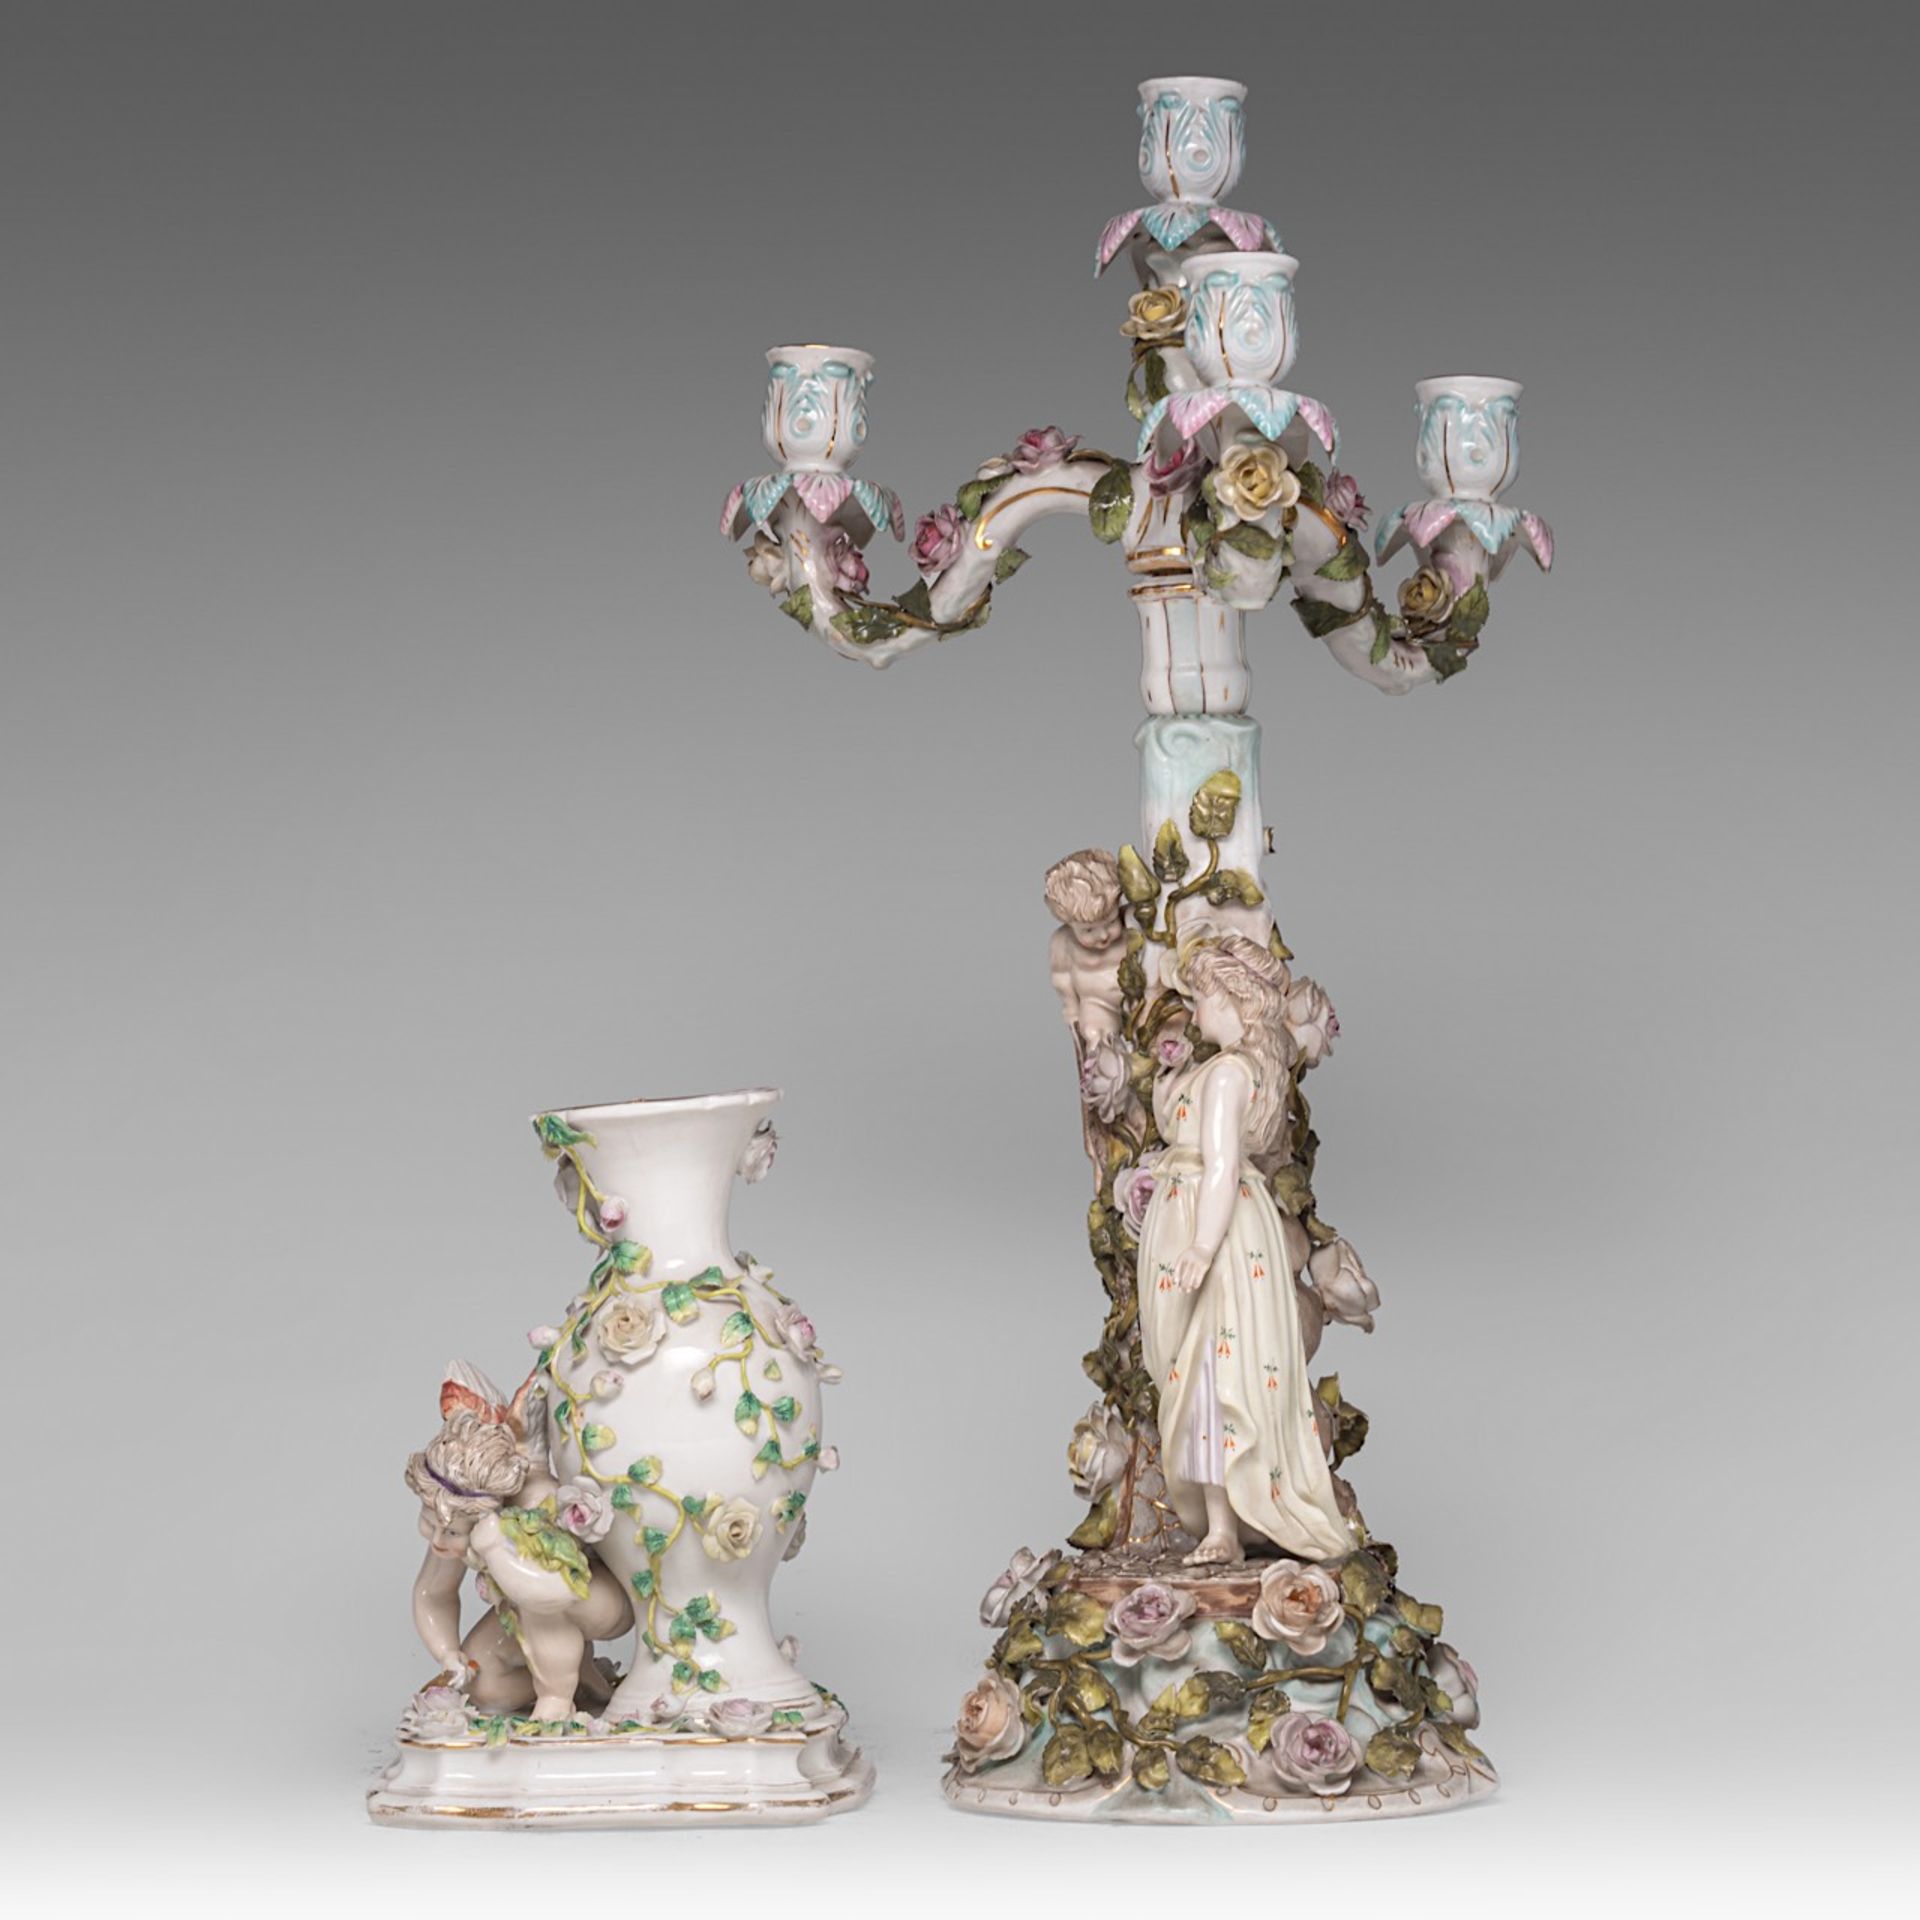 A collection of polychrome decorated Saxon porcelain figurines and a candelabra, H 51,5 cm (tallest) - Image 3 of 13